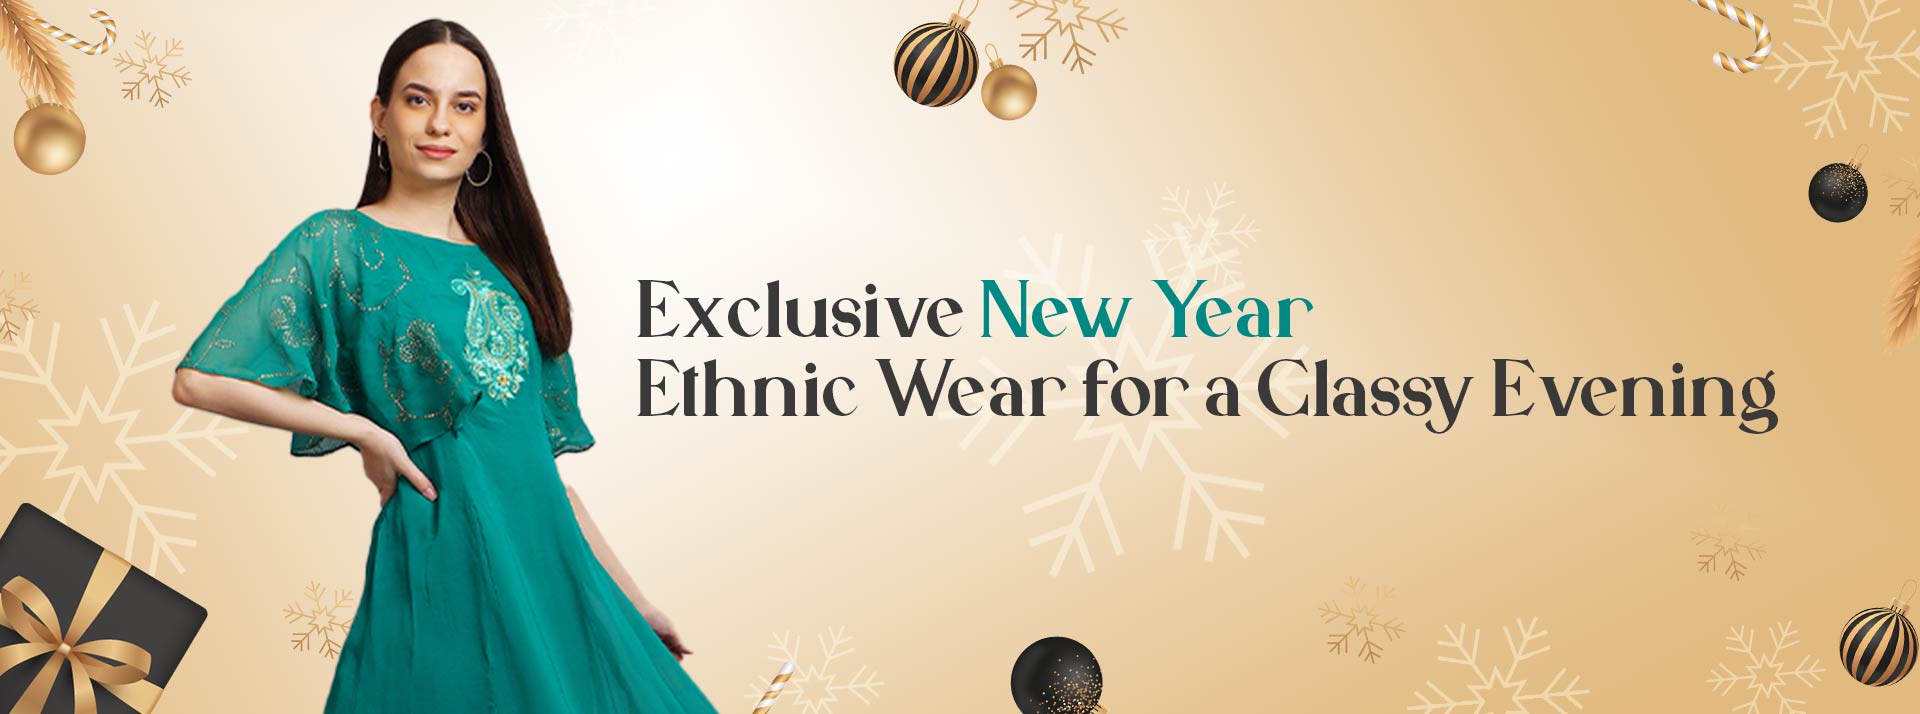 Exclusive New Year Ethnic Wear for a Classy Evening